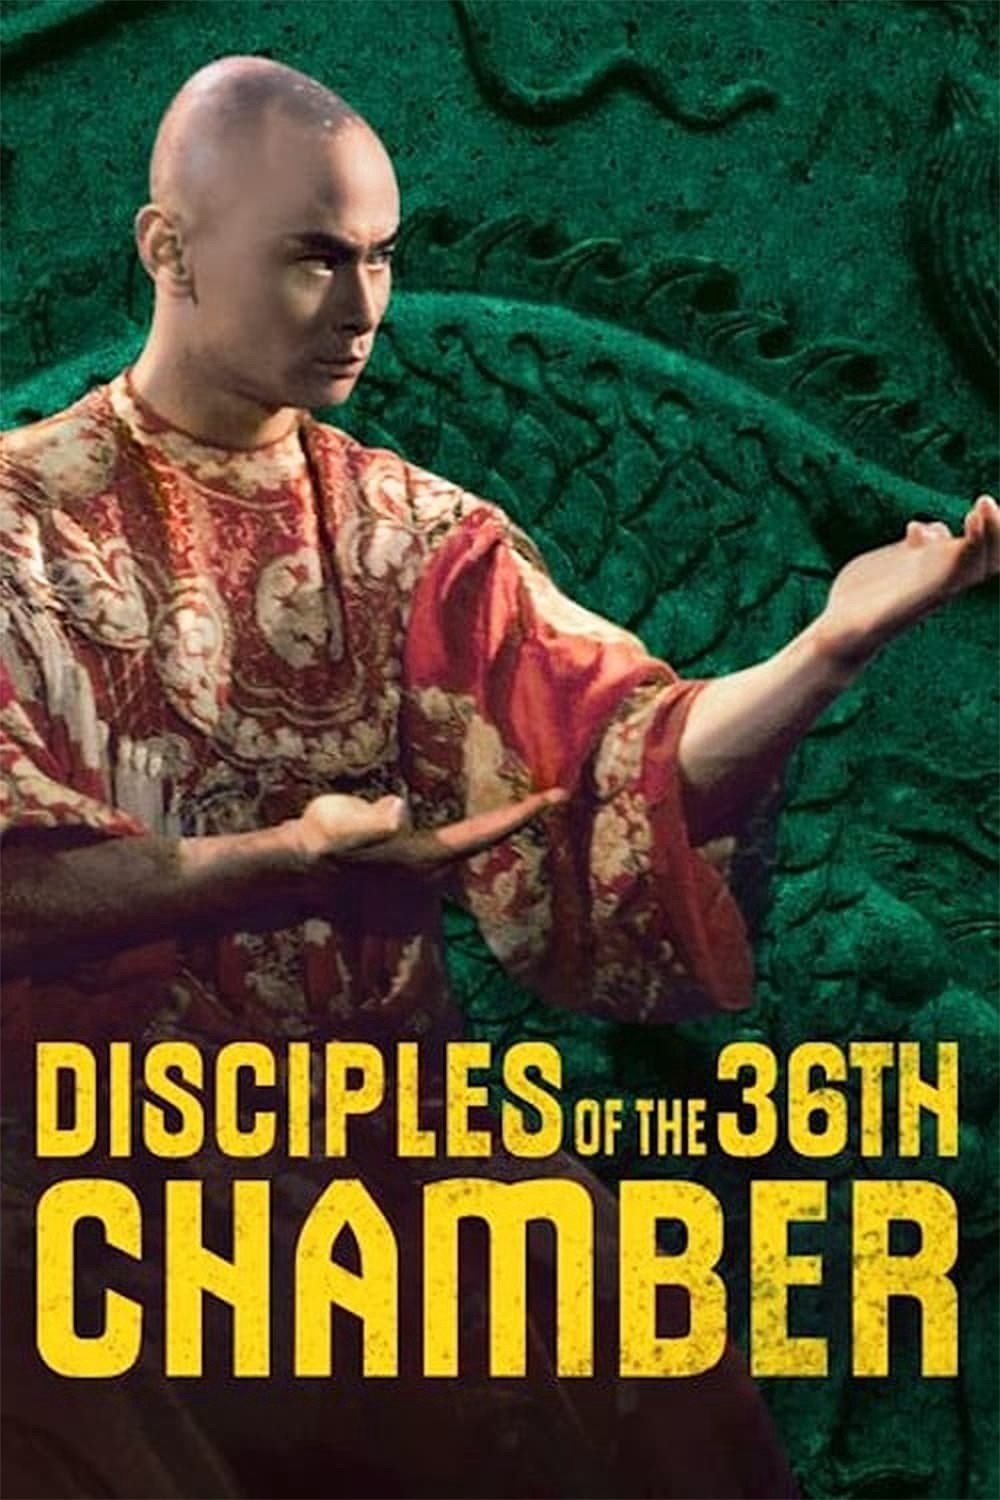 Disciples of the 36th Chamber - Disciples of the 36th Chamber